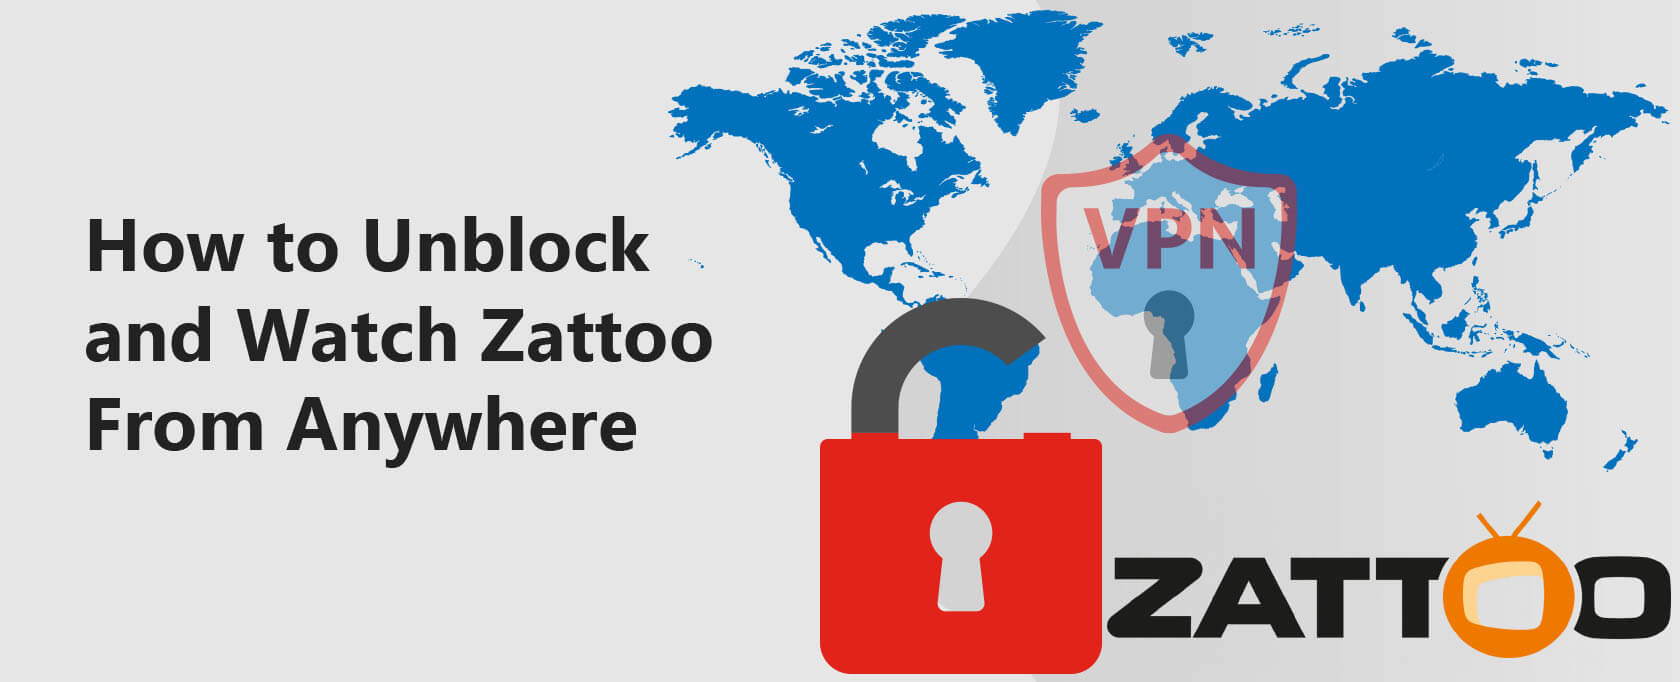 How to Unblock and Watch Zattoo From Anywhere